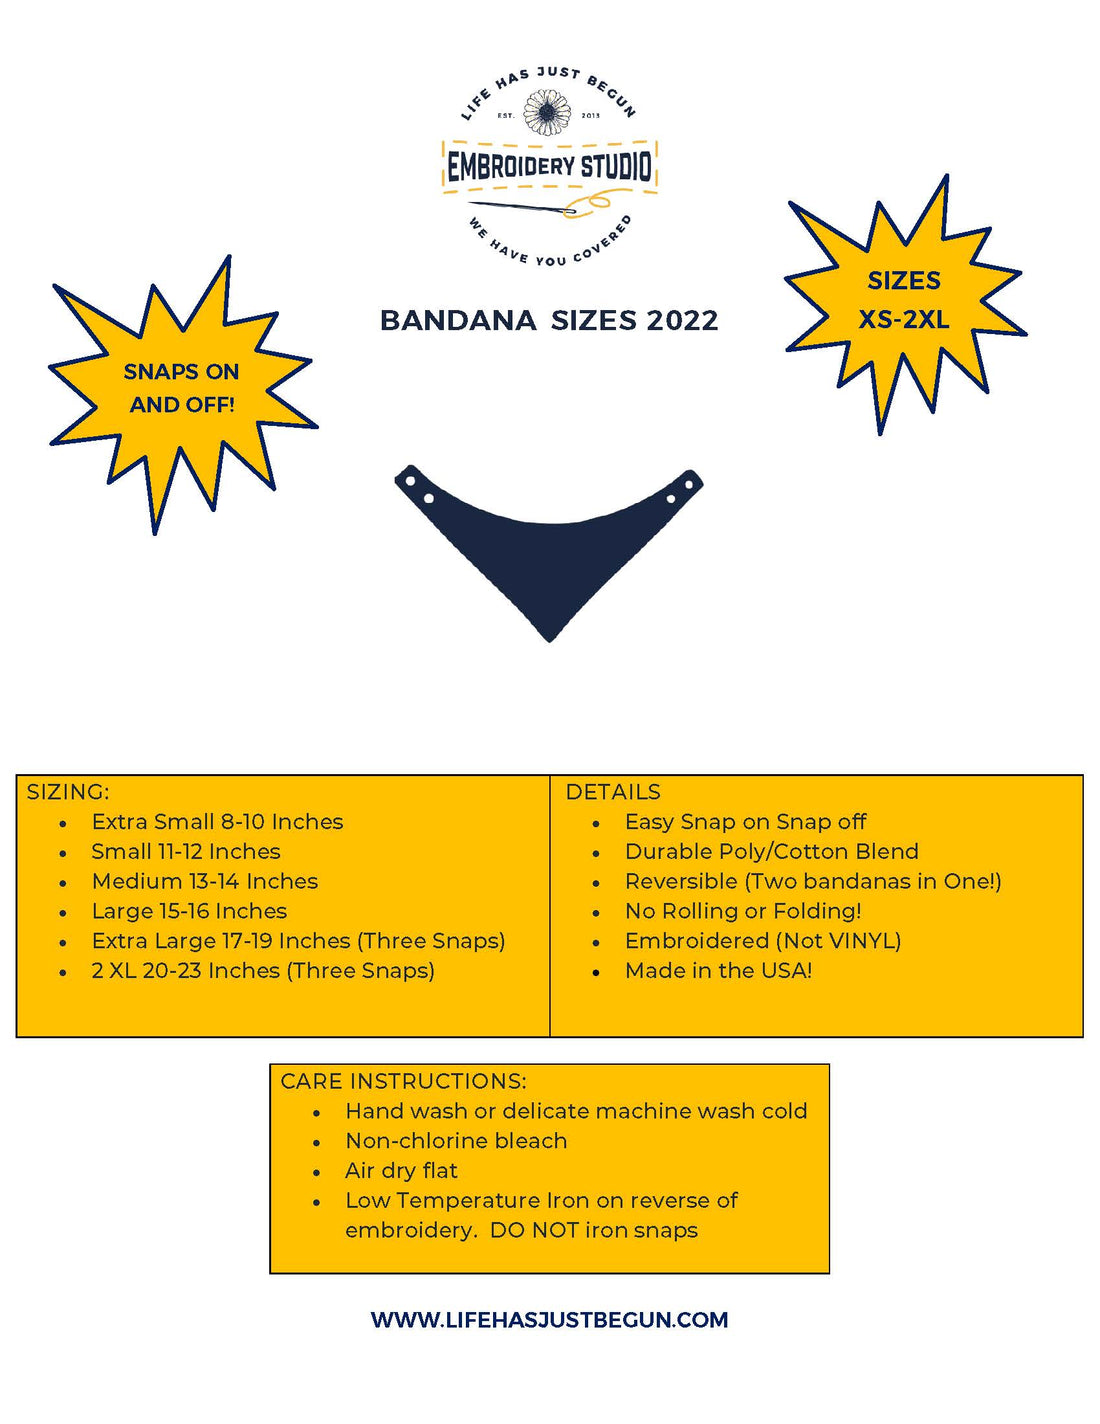 Bandana Sizes, details and care instructions - Life Has Just Begun